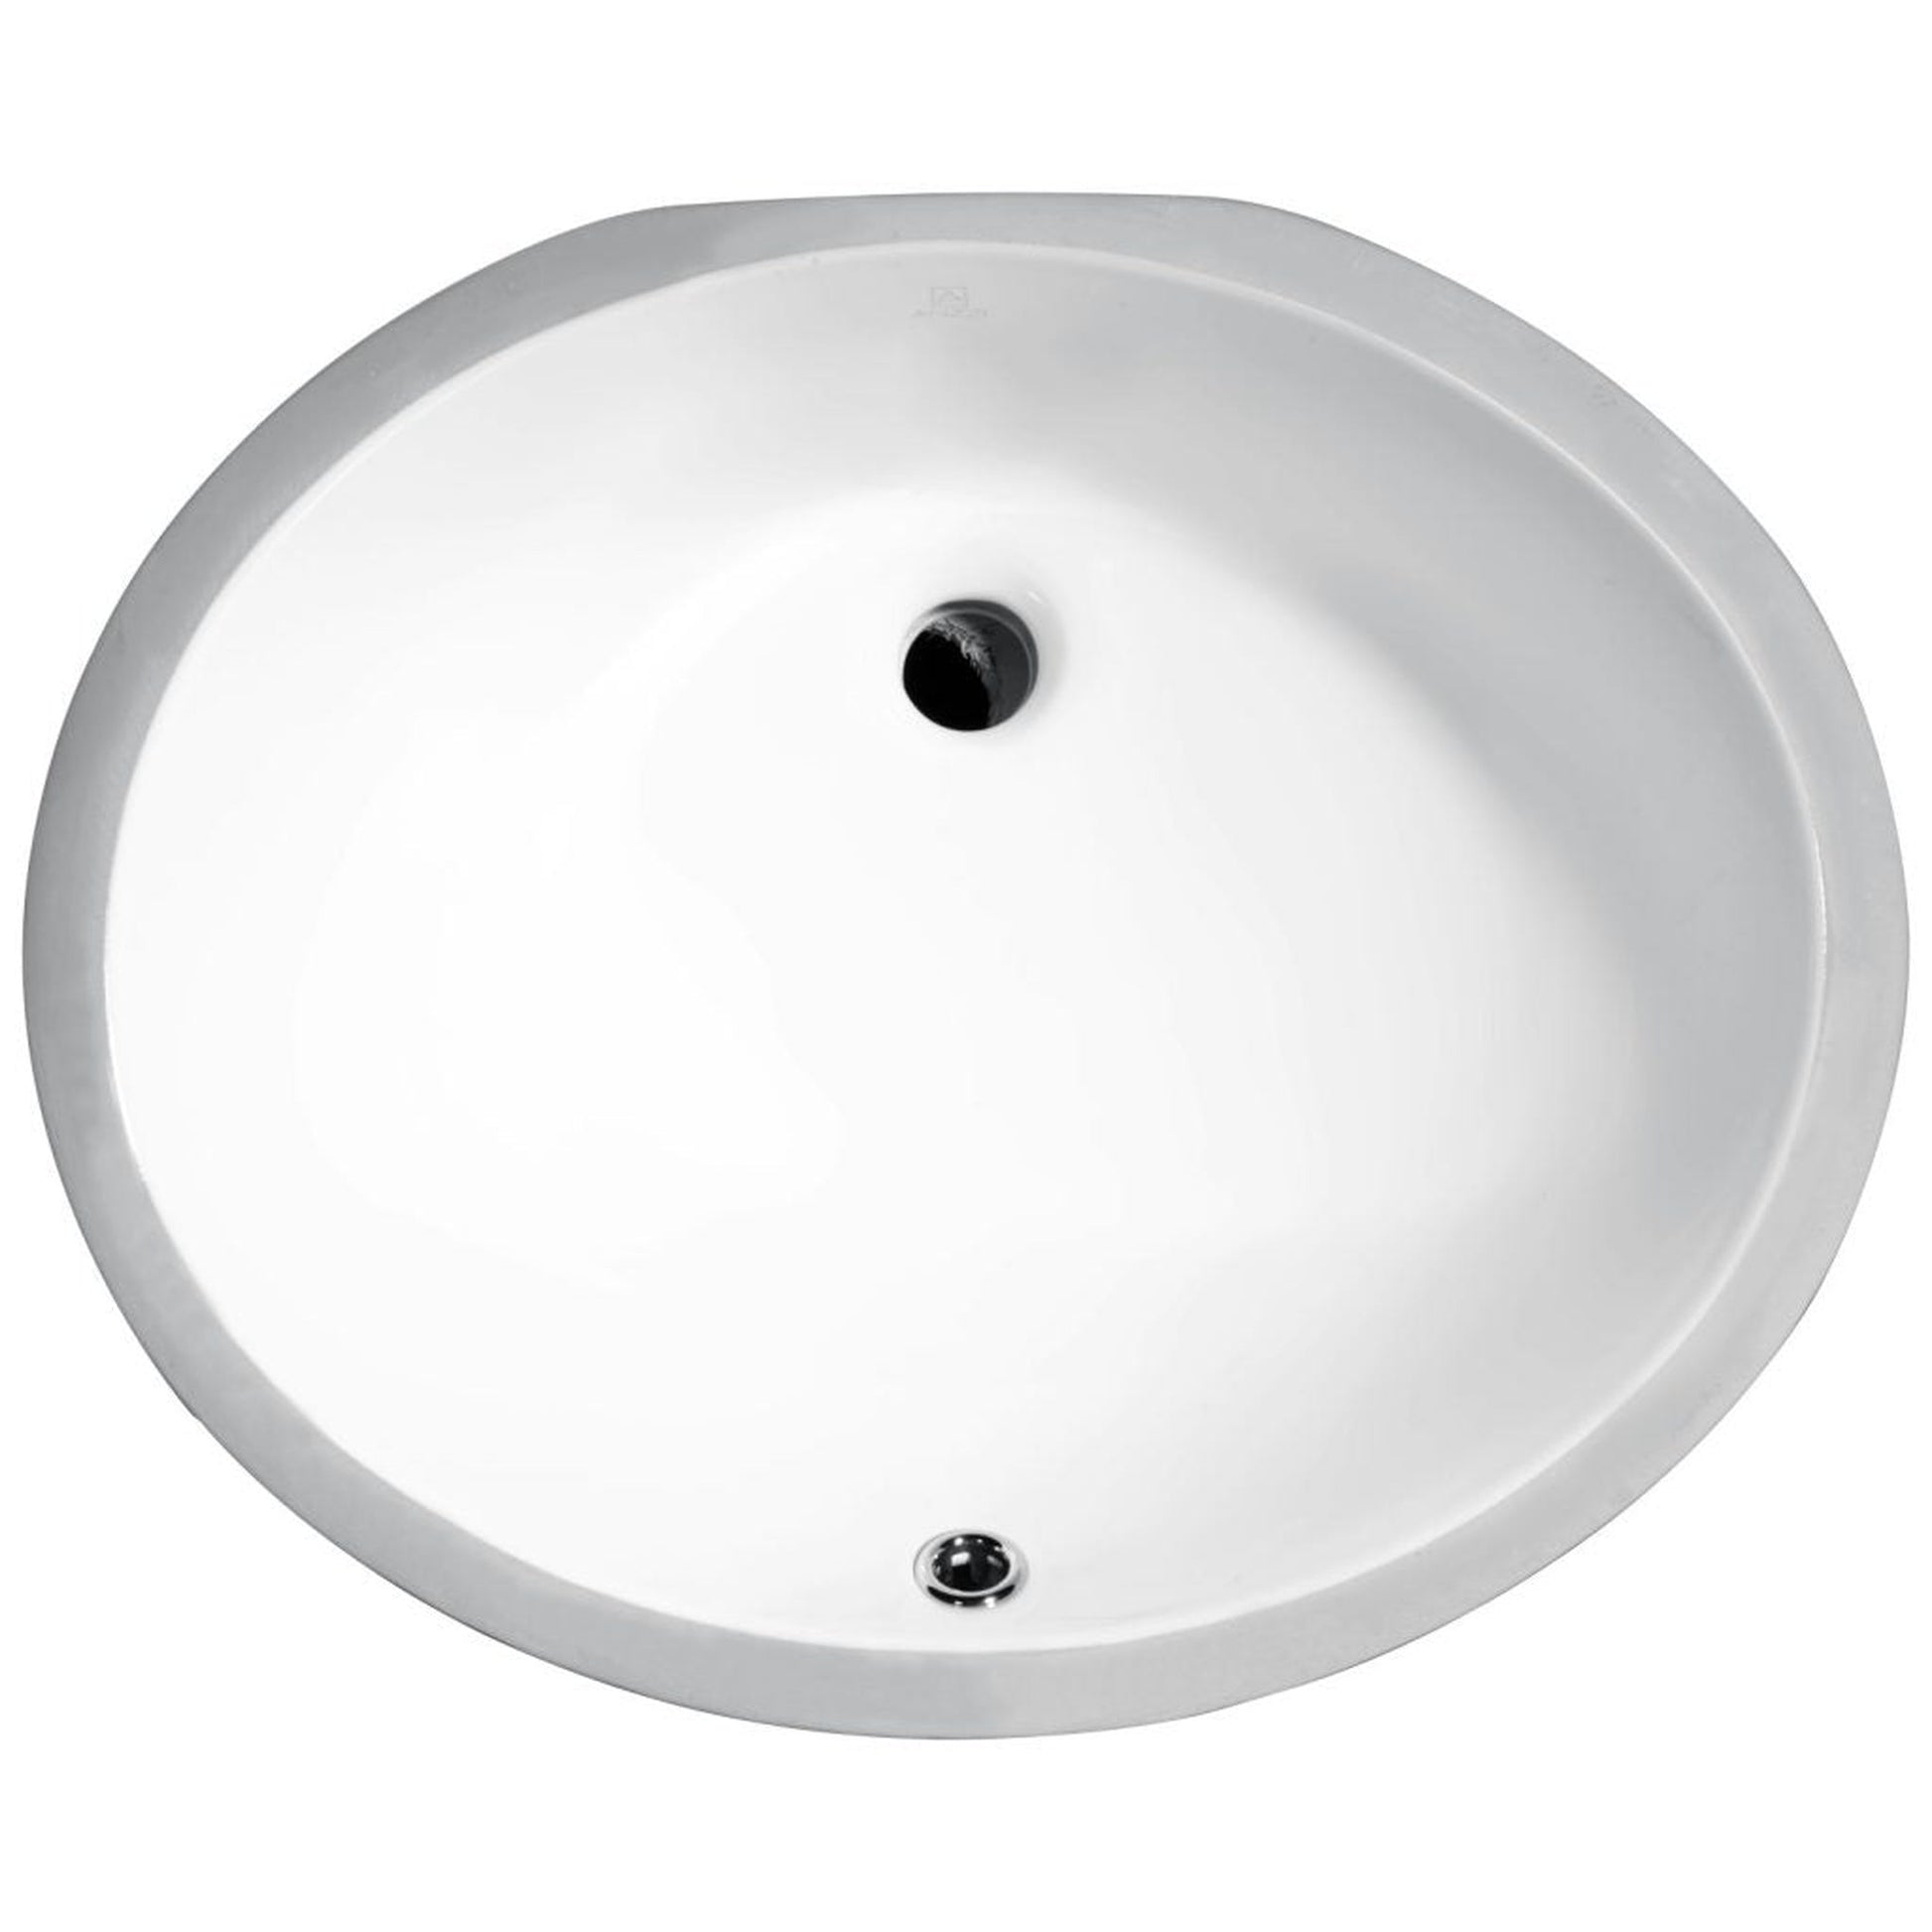 ANZZI Pegasus Series 18" x 15" Oval Shape Glossy White Undermount Sink With Built-In Overflow